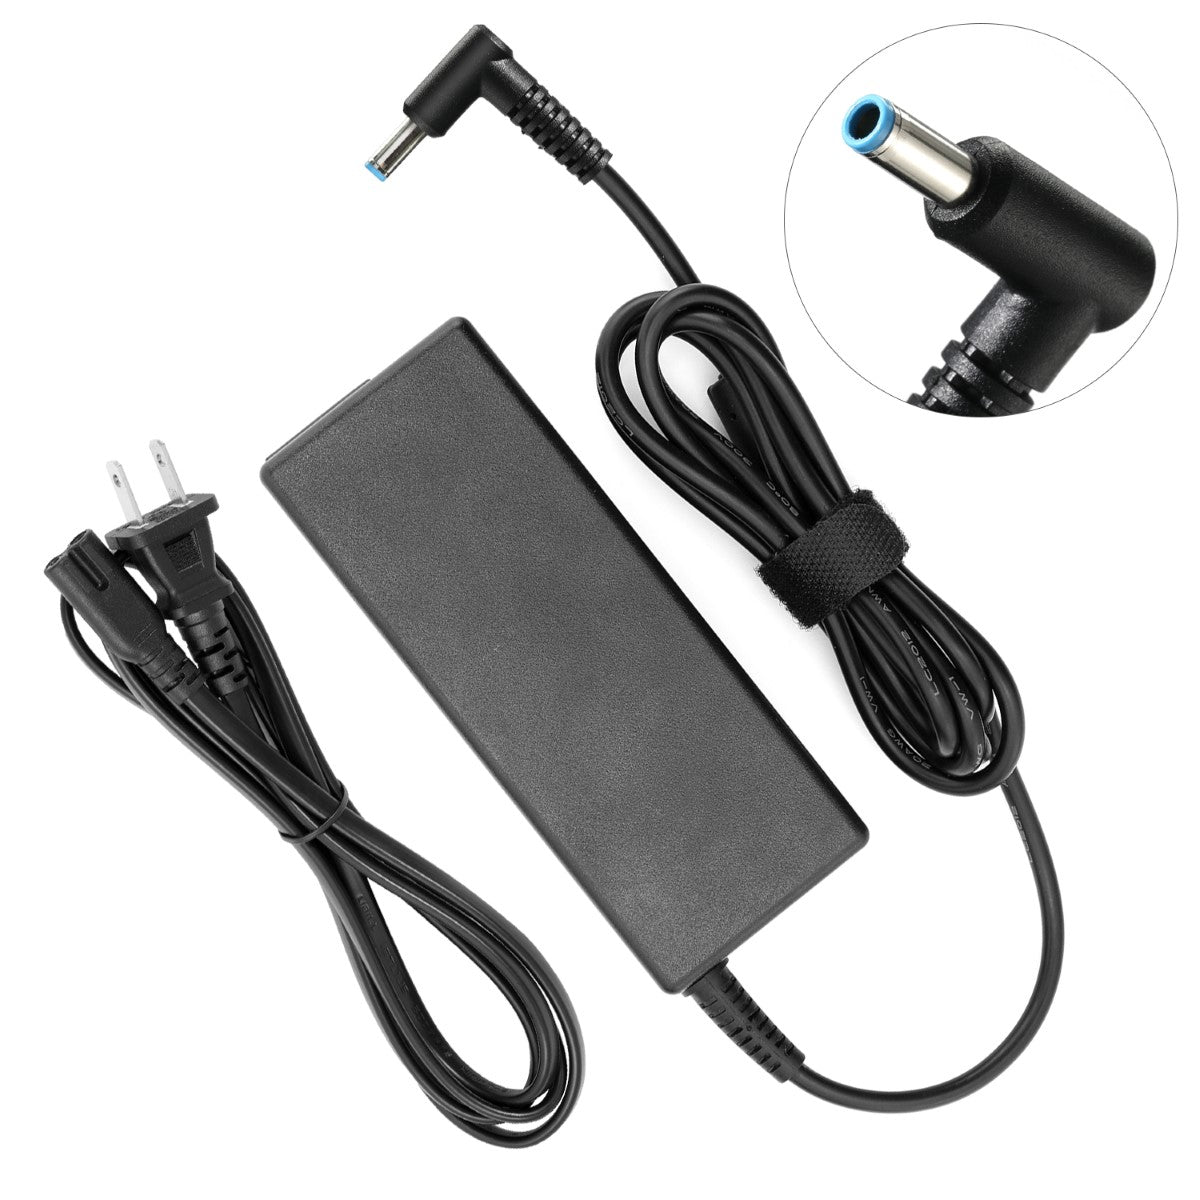 AC Adapter Charger for HP ProBook 450 G3 Notebook.